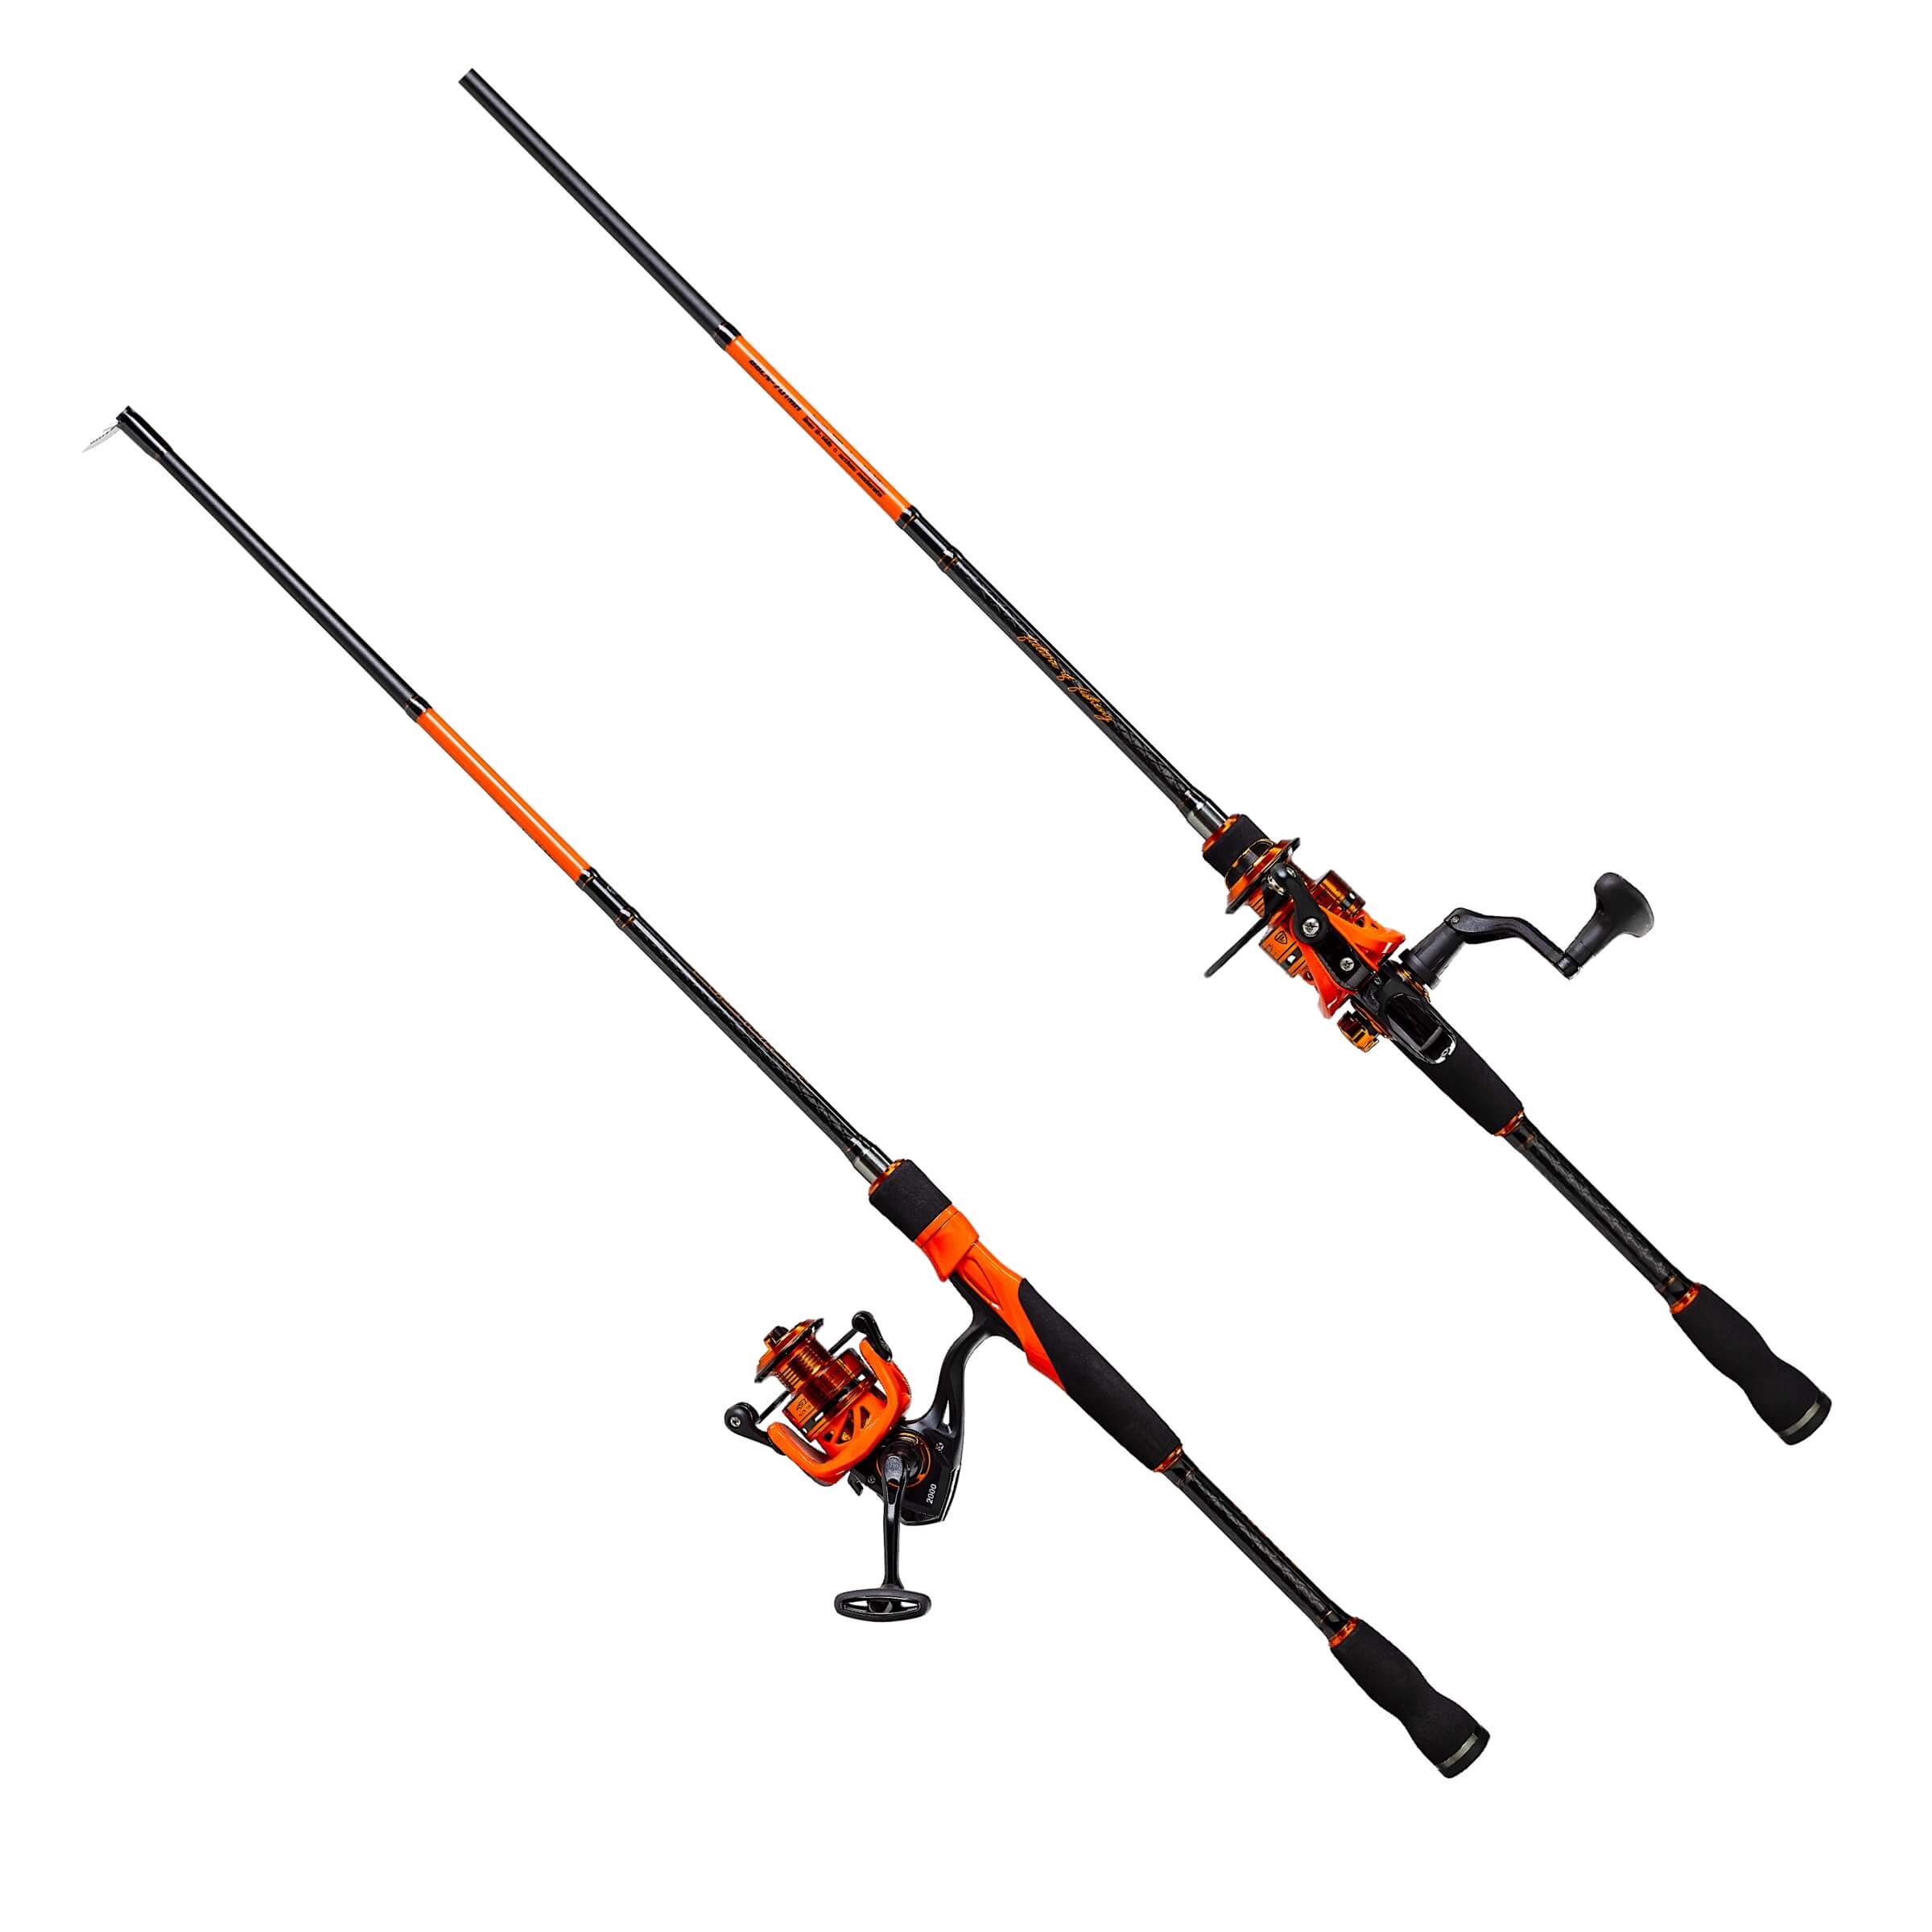 Favorite Fishing Fire Stick Spinning Combo - 7ft 1in, Medium Heavy Power